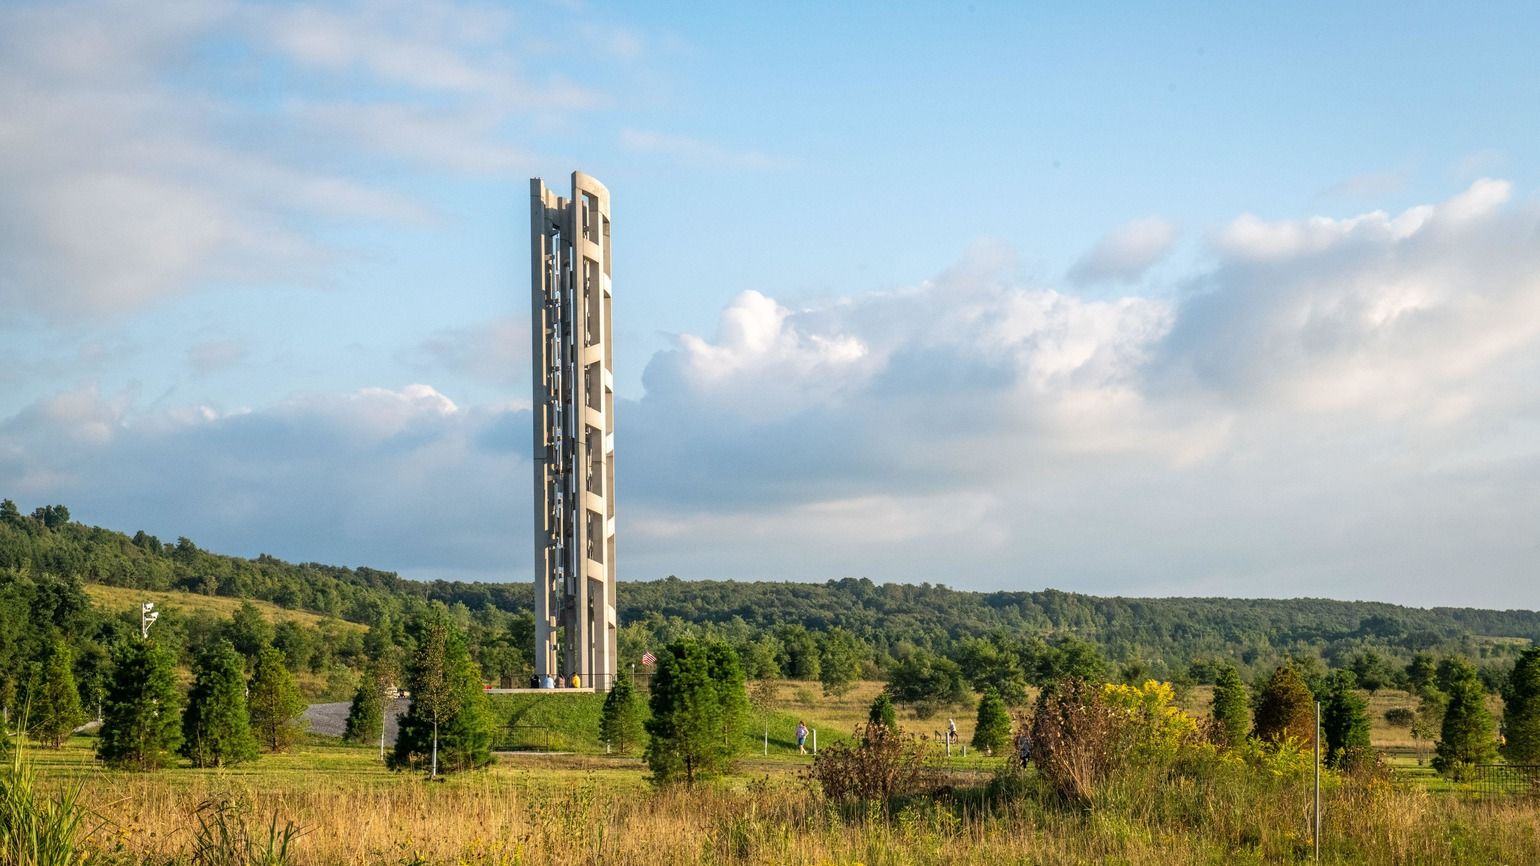 The Tower of Voices at Flight 93 Memorial, Shanksville, PA (Alamy)